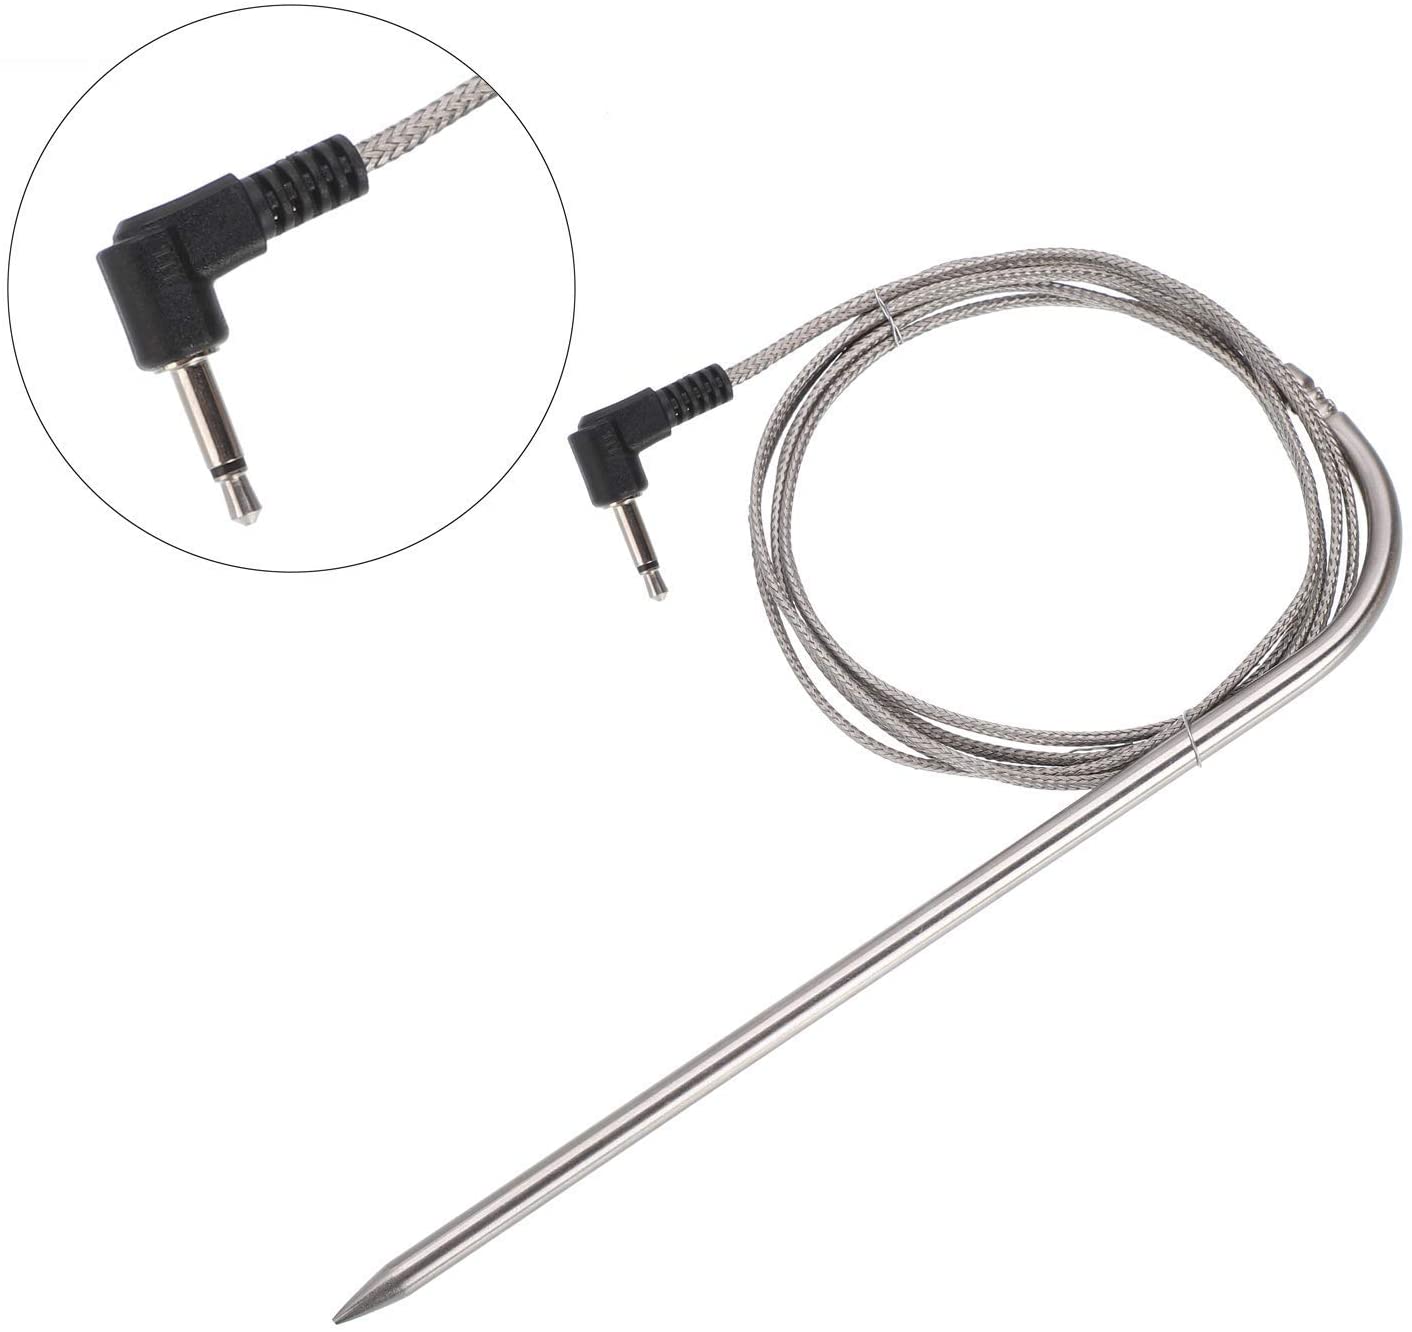 3.5mm Plug Meat Probe for Pit Boss Sportsman 5 Series Vertical Smoker (PBV5P1) Grills, Replacement High Temperature BBQ Digital Thermostat Meat Probes